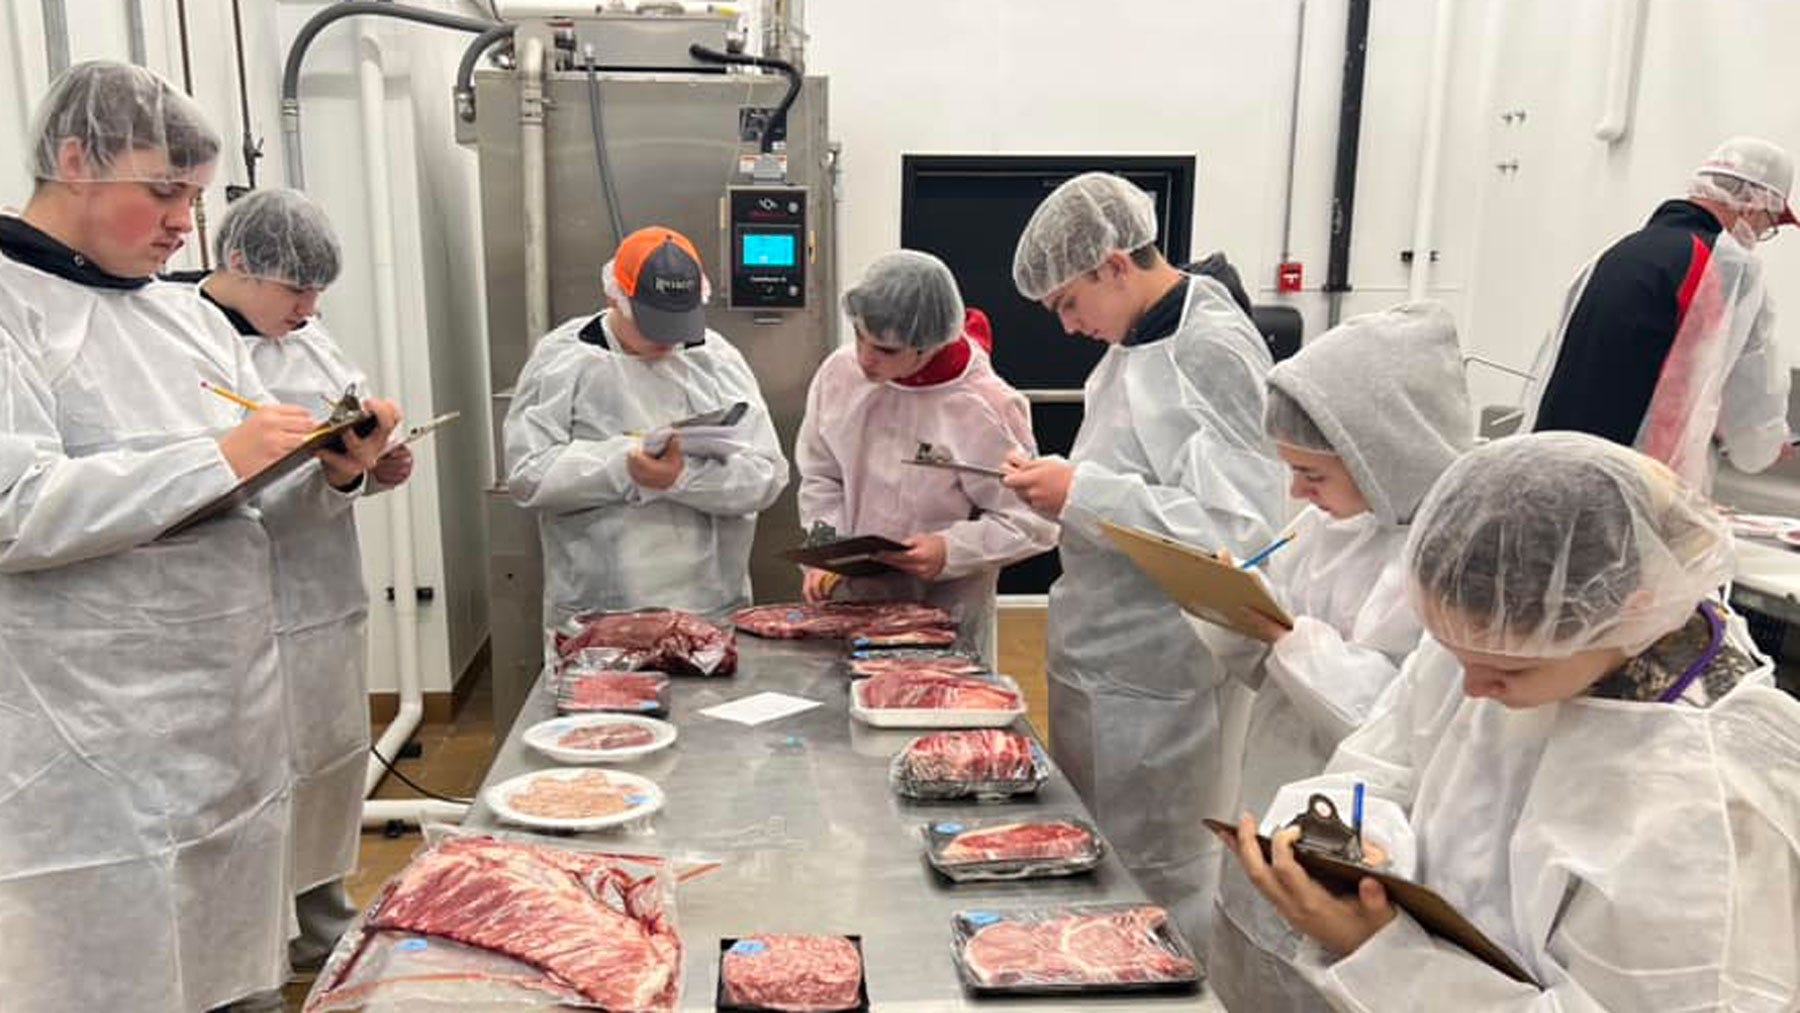 College students dressed in butcher coats and hair nets standing around a table, holding clipboards and rating butcher cuts of meat on the table.